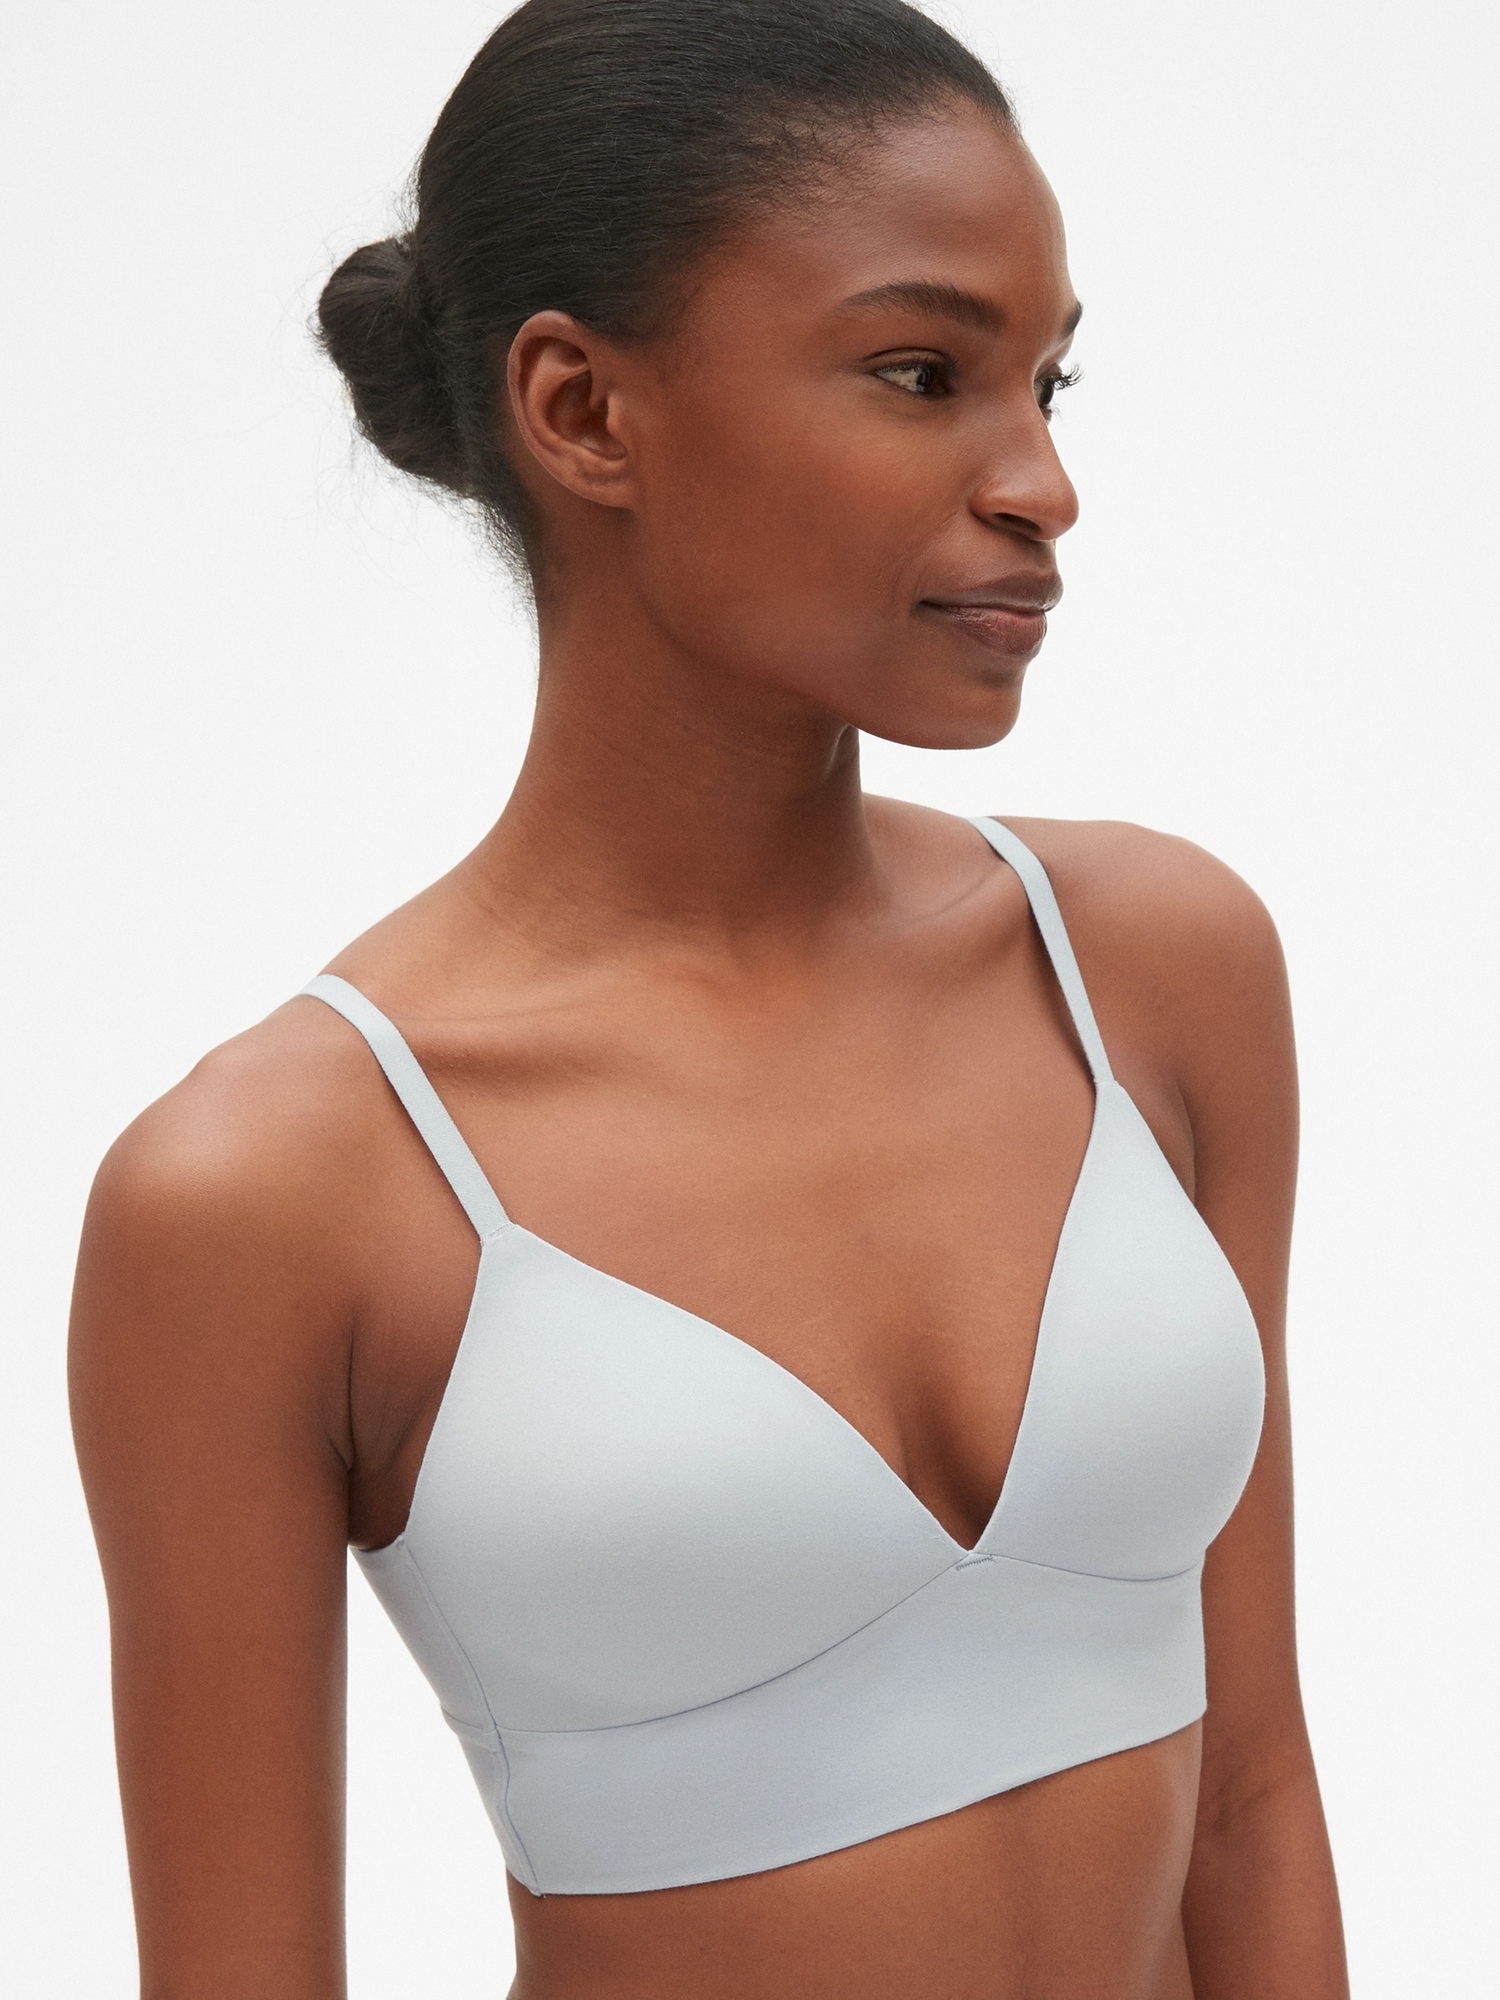 Buy Gap No-Show Bralette from the Gap online shop